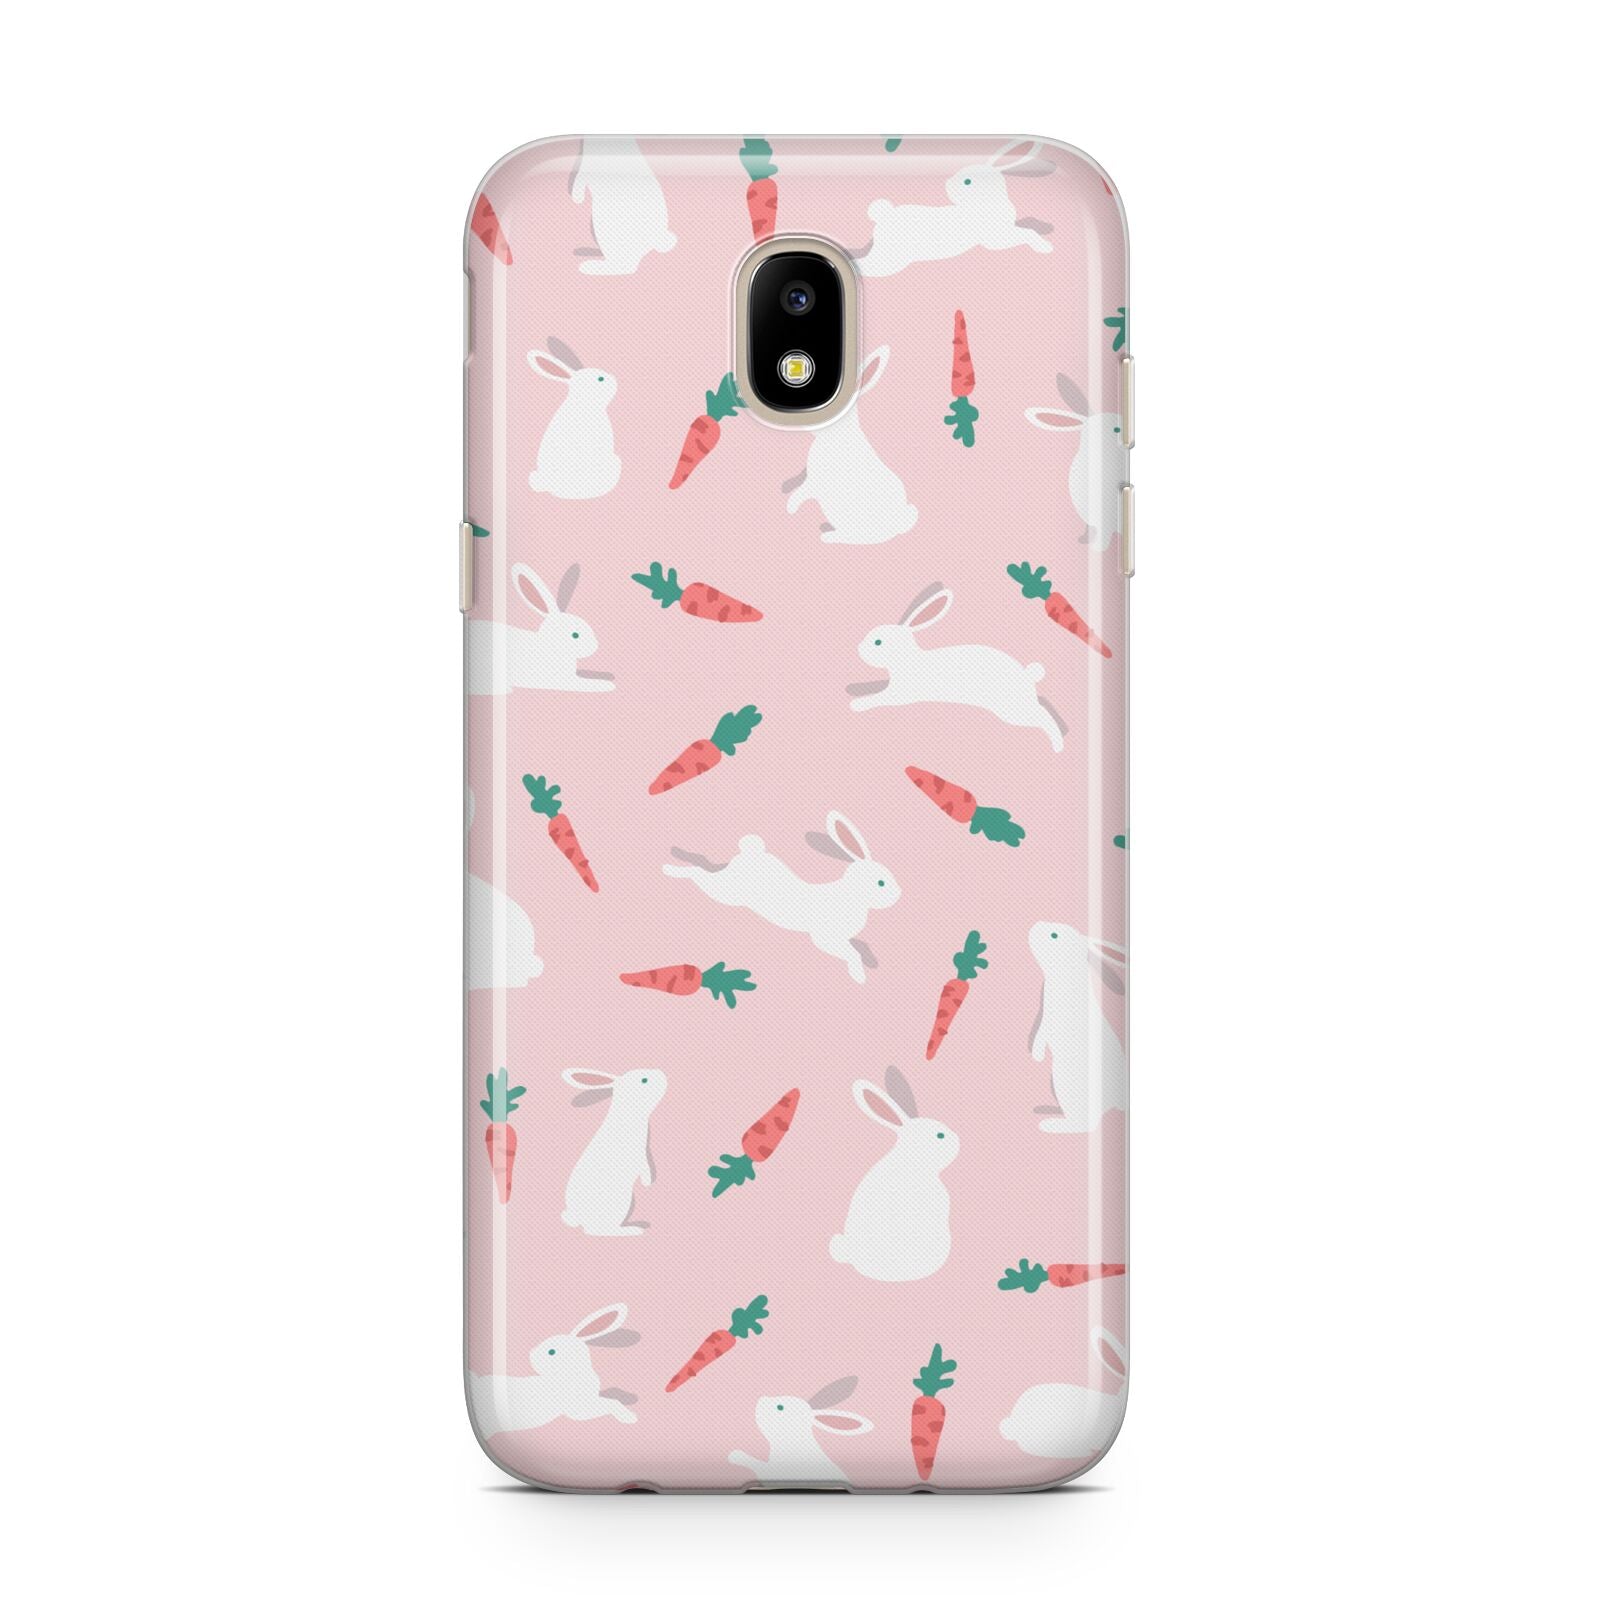 Easter Bunny And Carrot Samsung J5 2017 Case